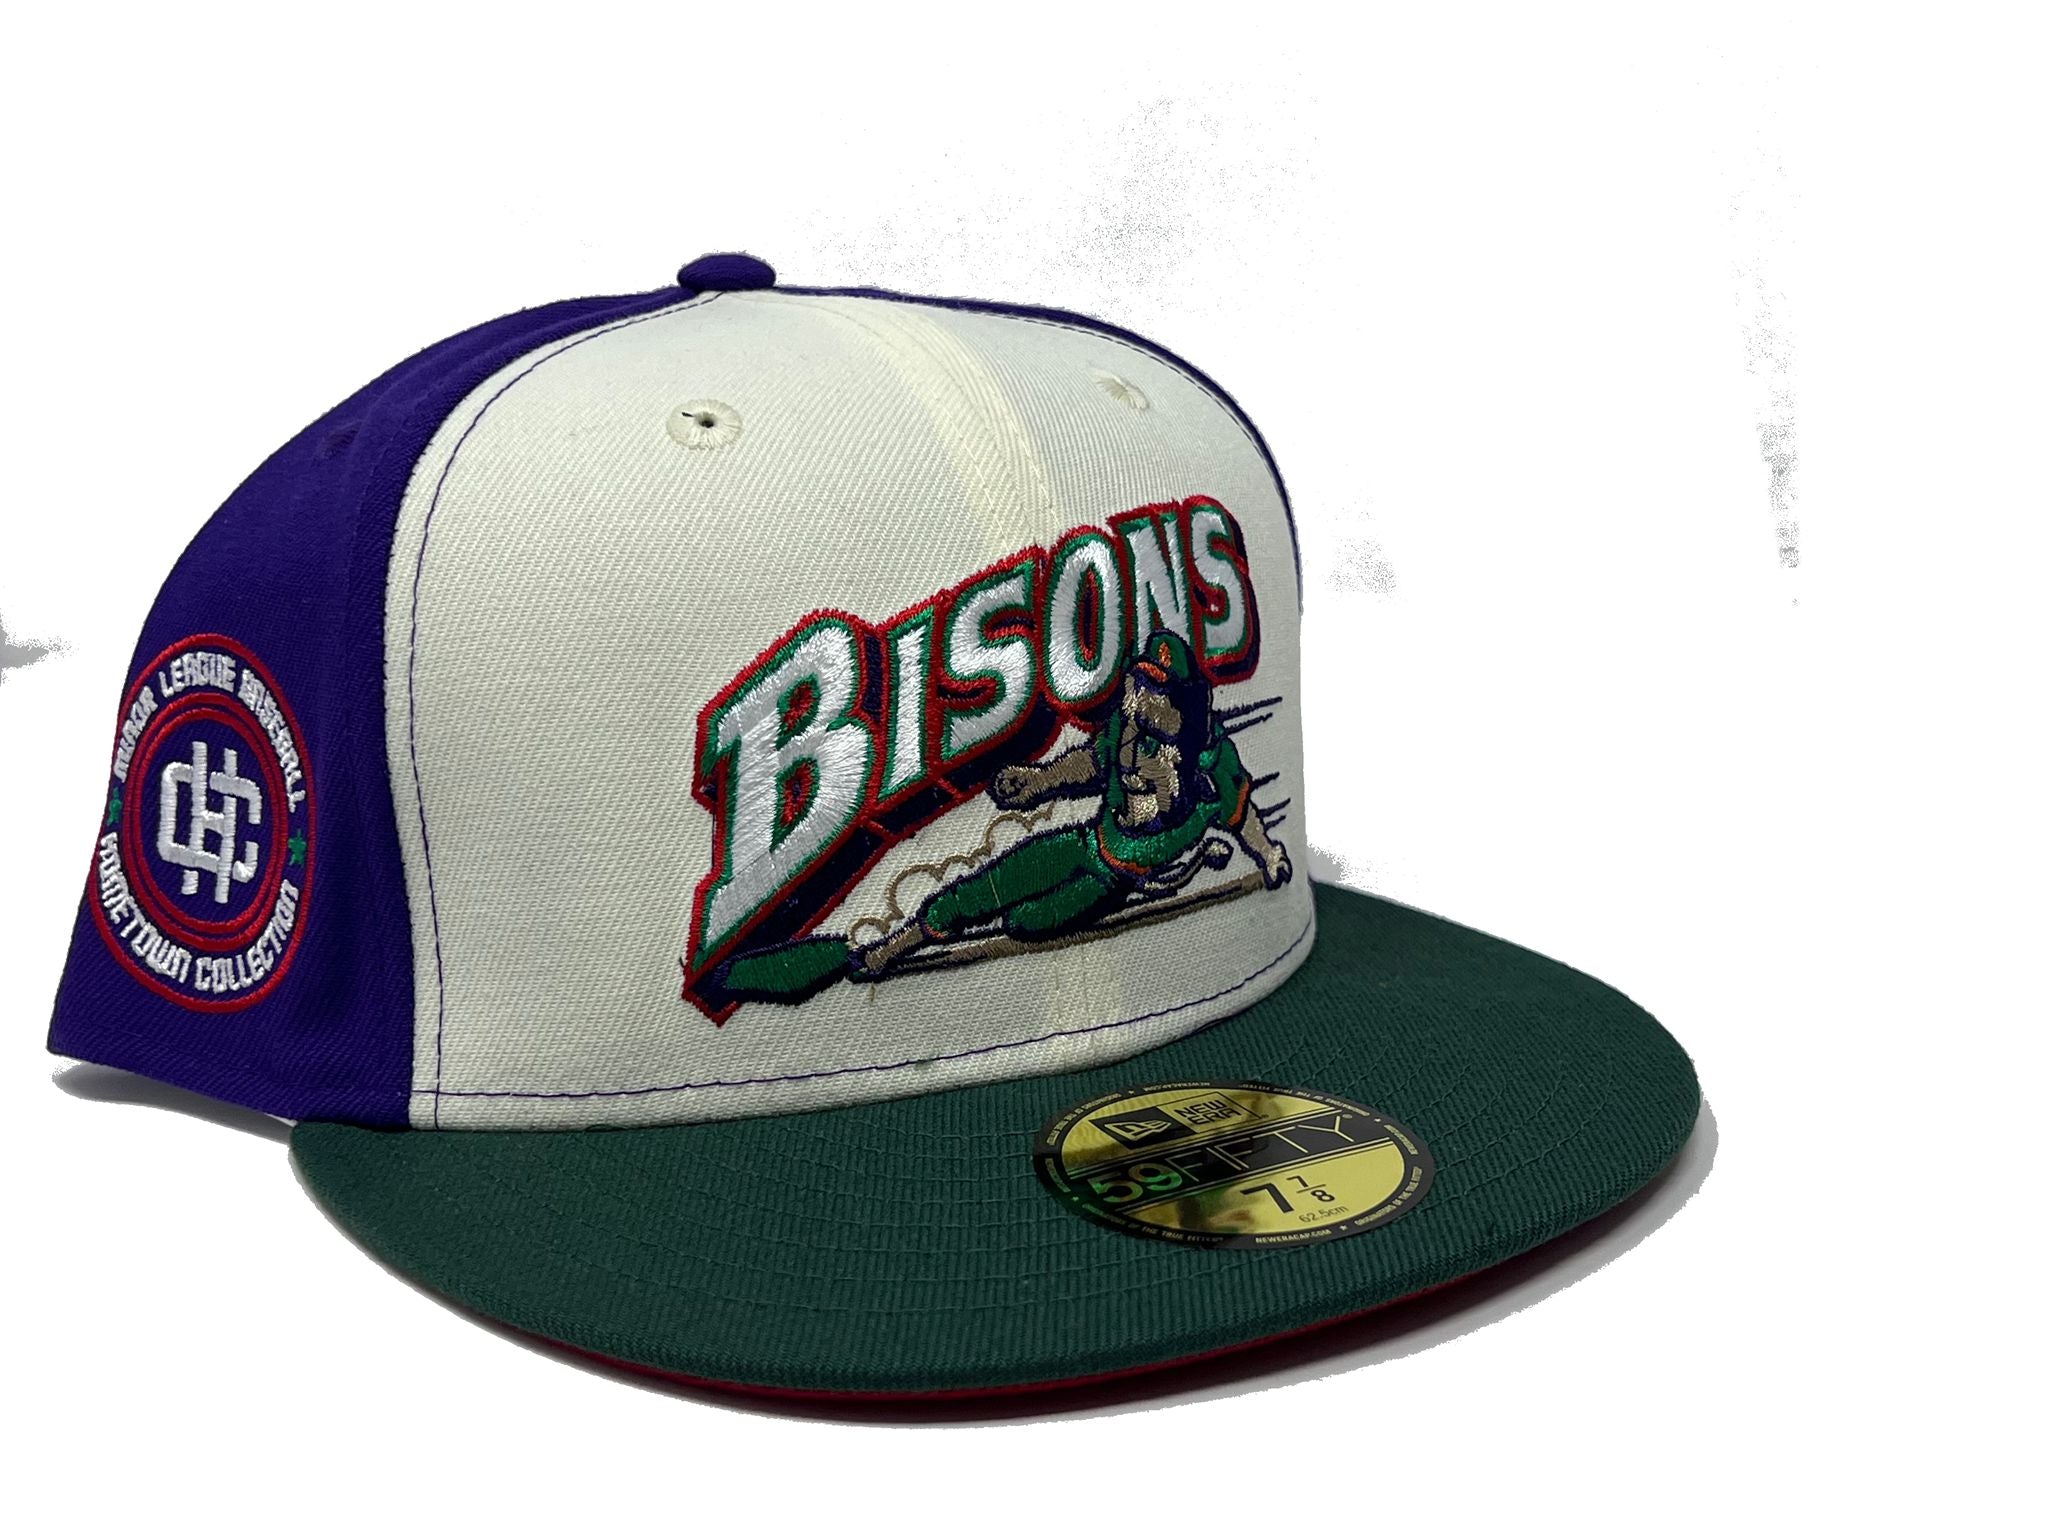 New Era Fitted Hat 7 MLB Club Buffalo Bisons Exclusive Script Patch UV Grail